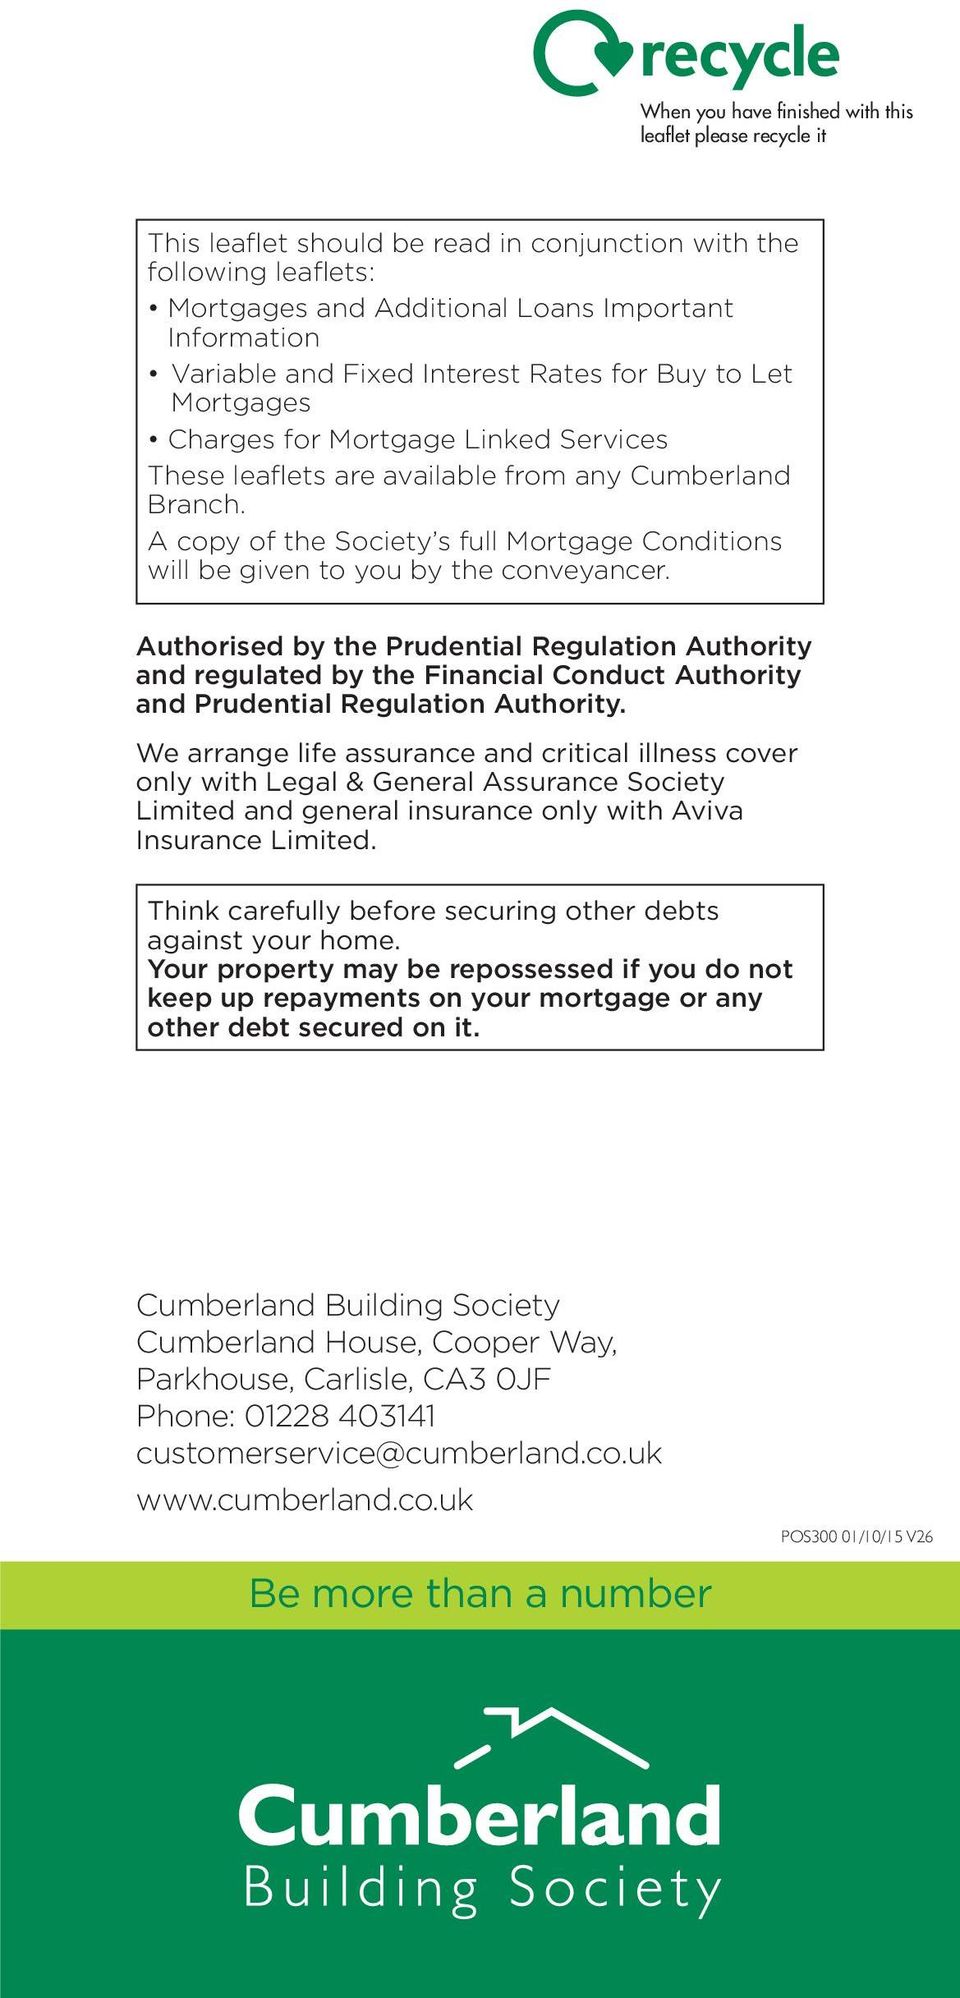 A copy of the Society s full Mortgage Conditions will be given to you by the conveyancer.